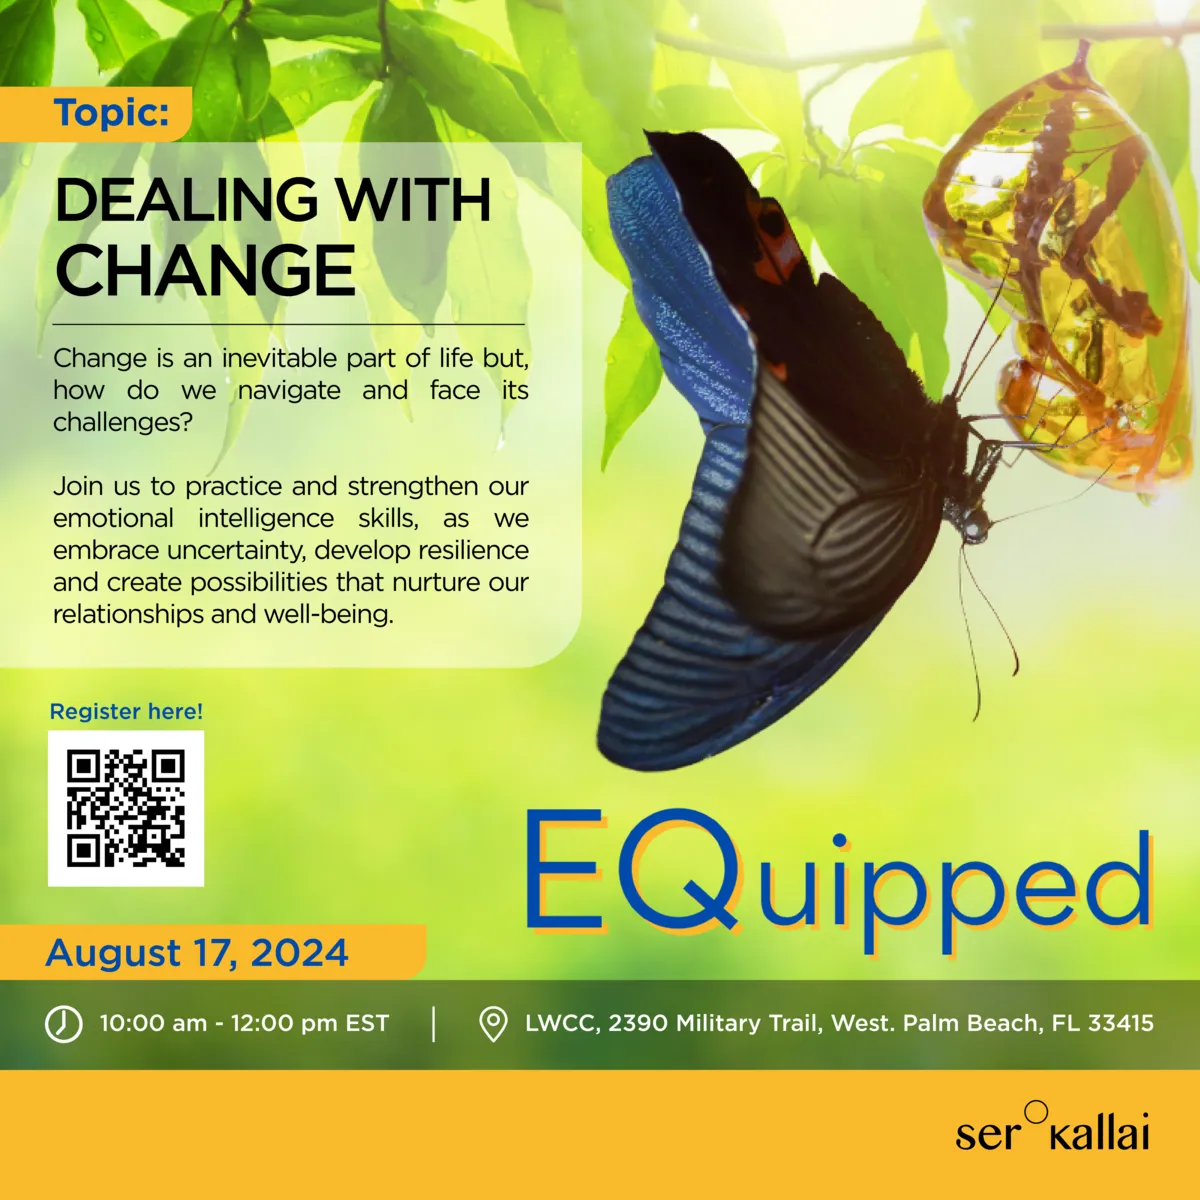 EQuipped - Dealing with Change (FL)